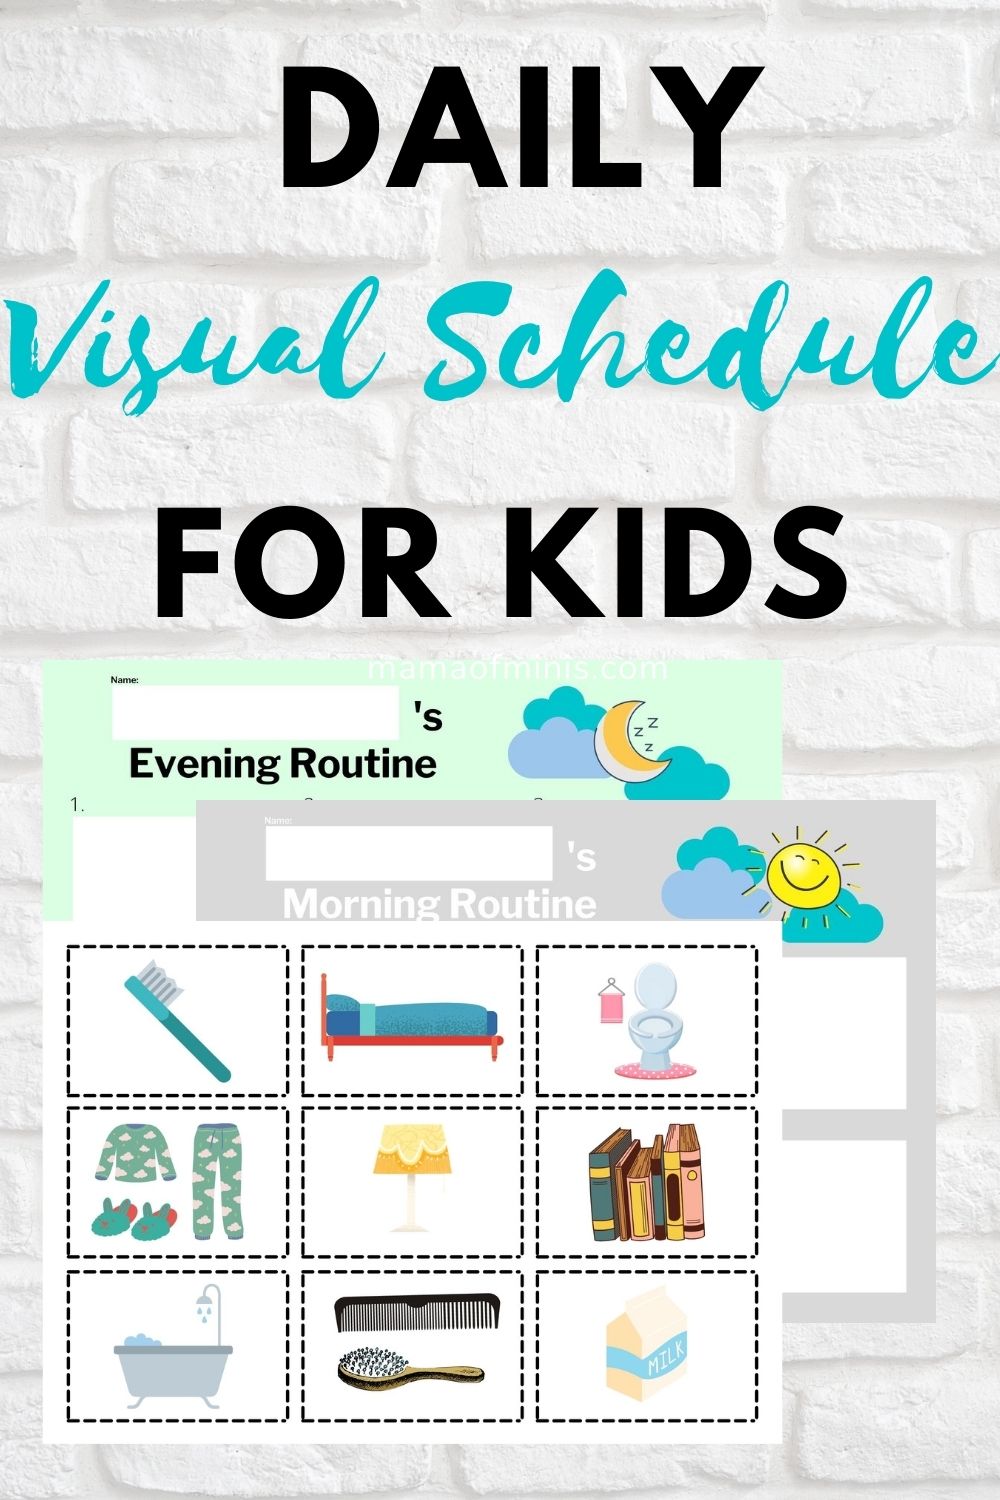 Daily Visual Schedule for Kids